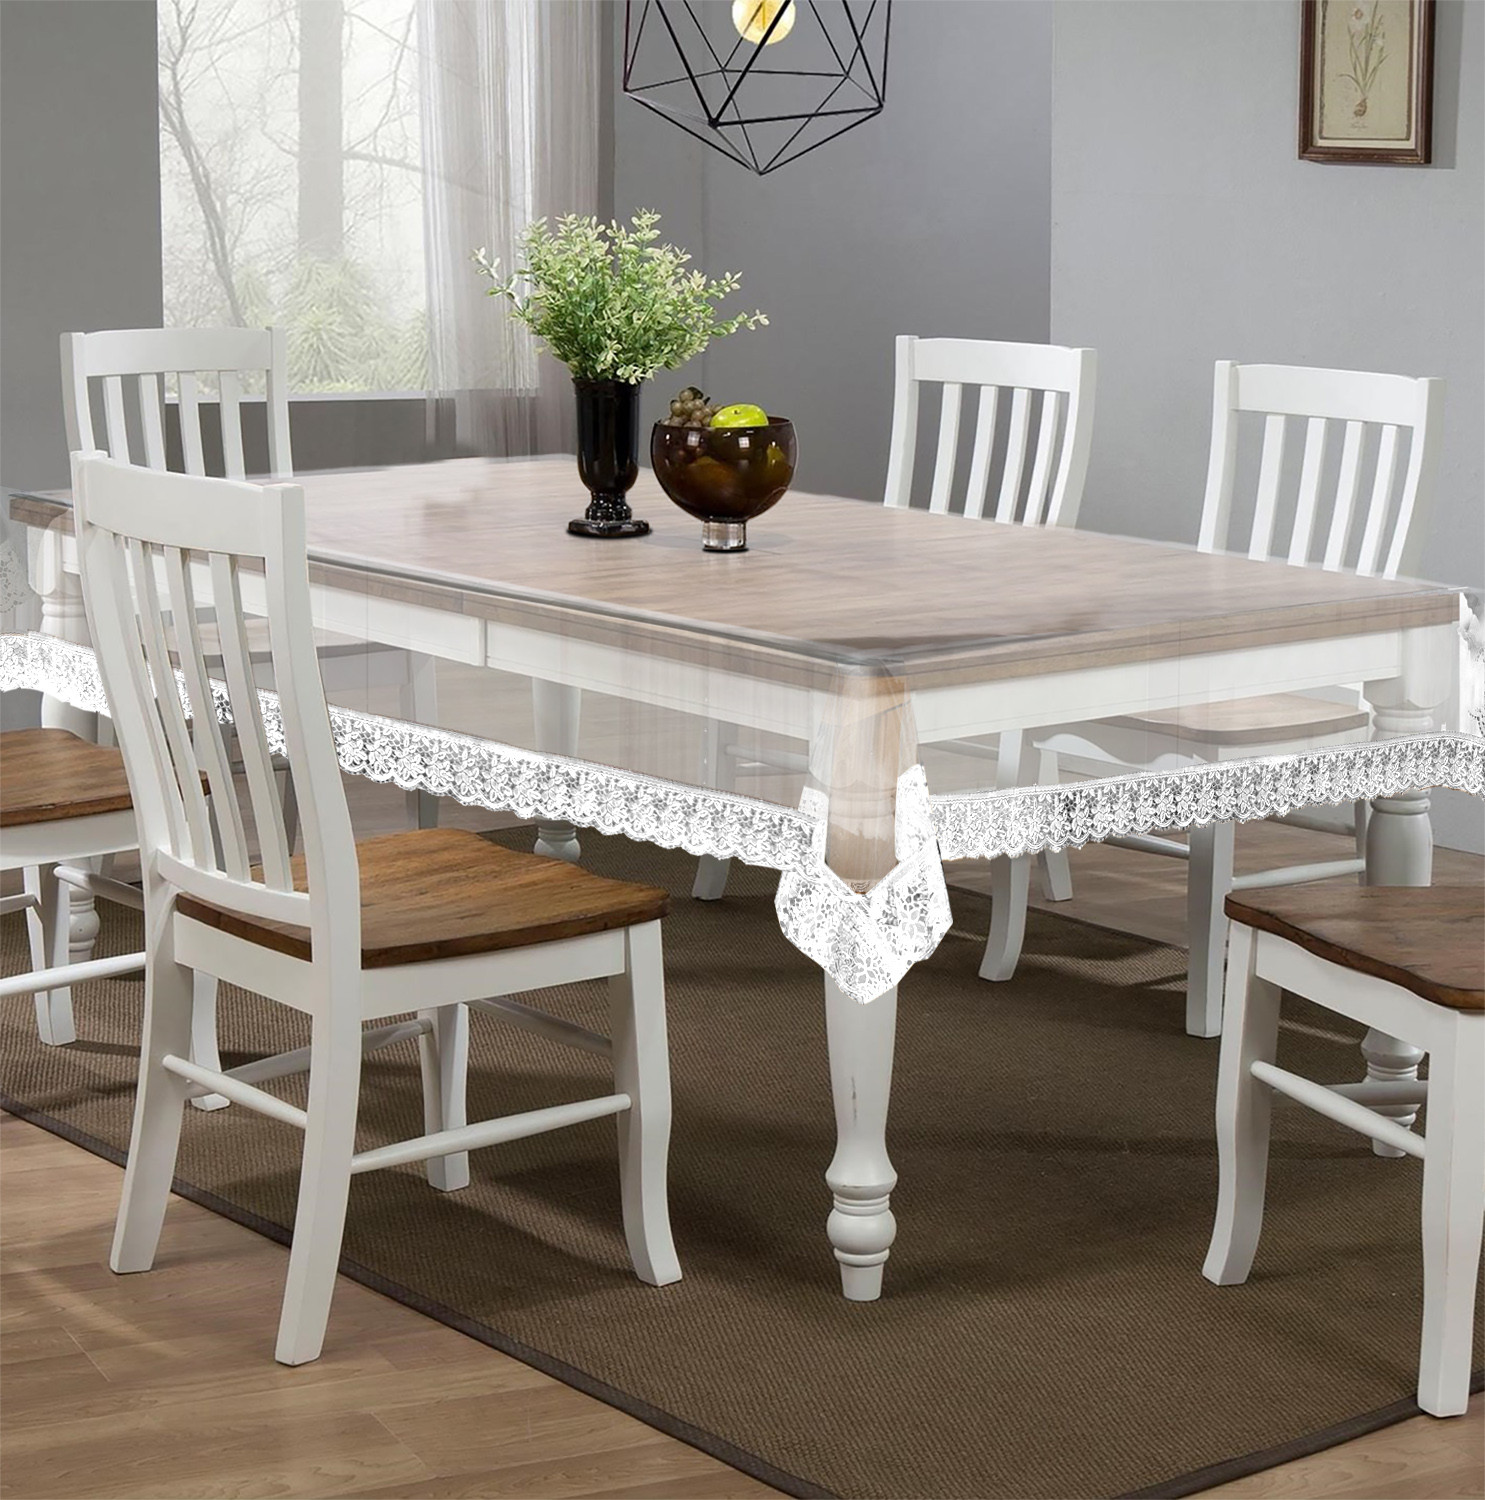 Kuber Industries PVC Dining Table Cover/Table Cloth For Home Decorative Luxurious 6 Seater, 60